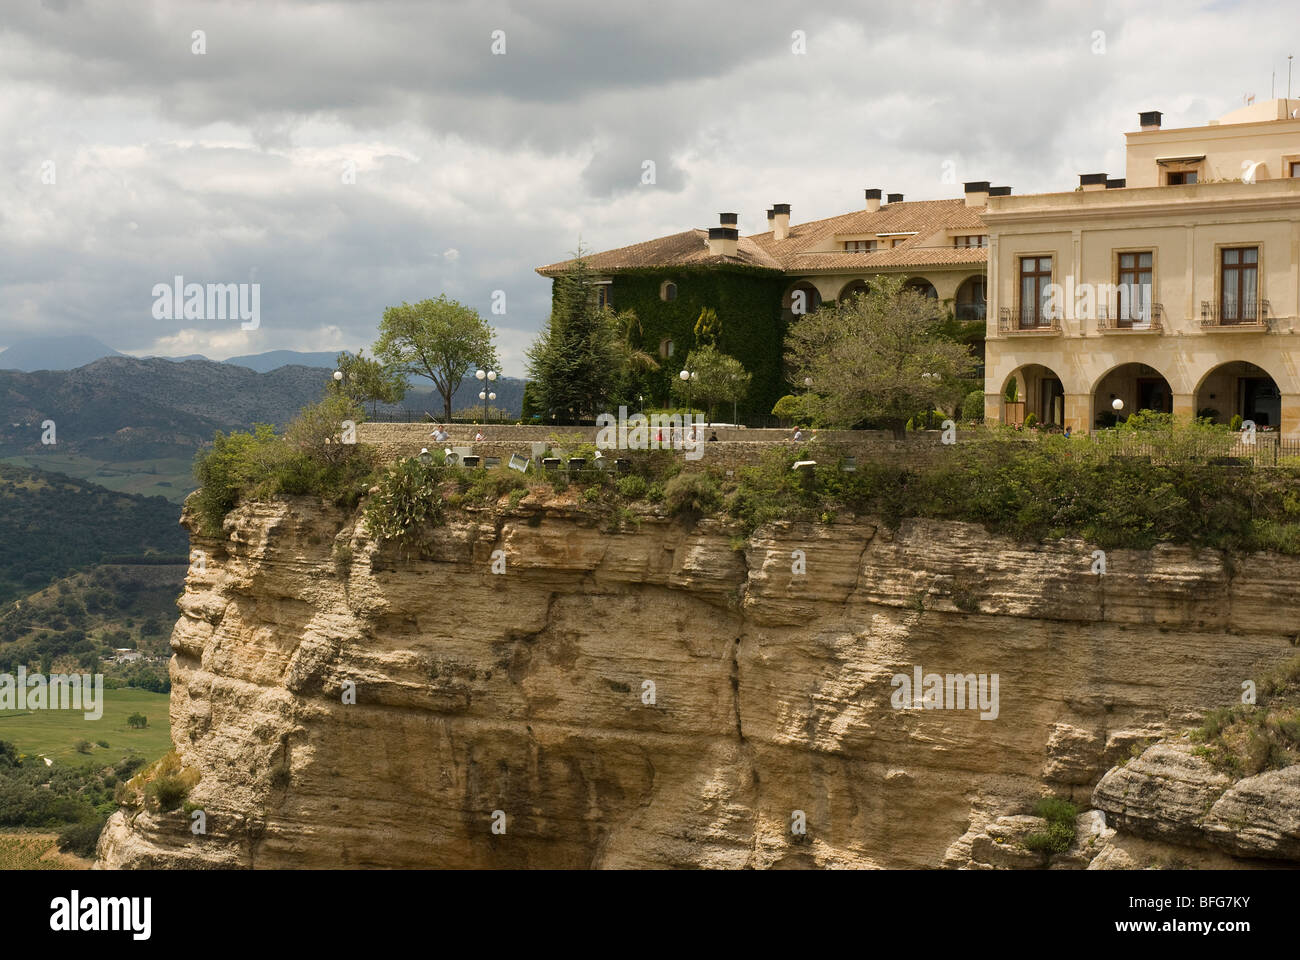 Hotel built on cliff tops at Ronda, Spain Stock Photo